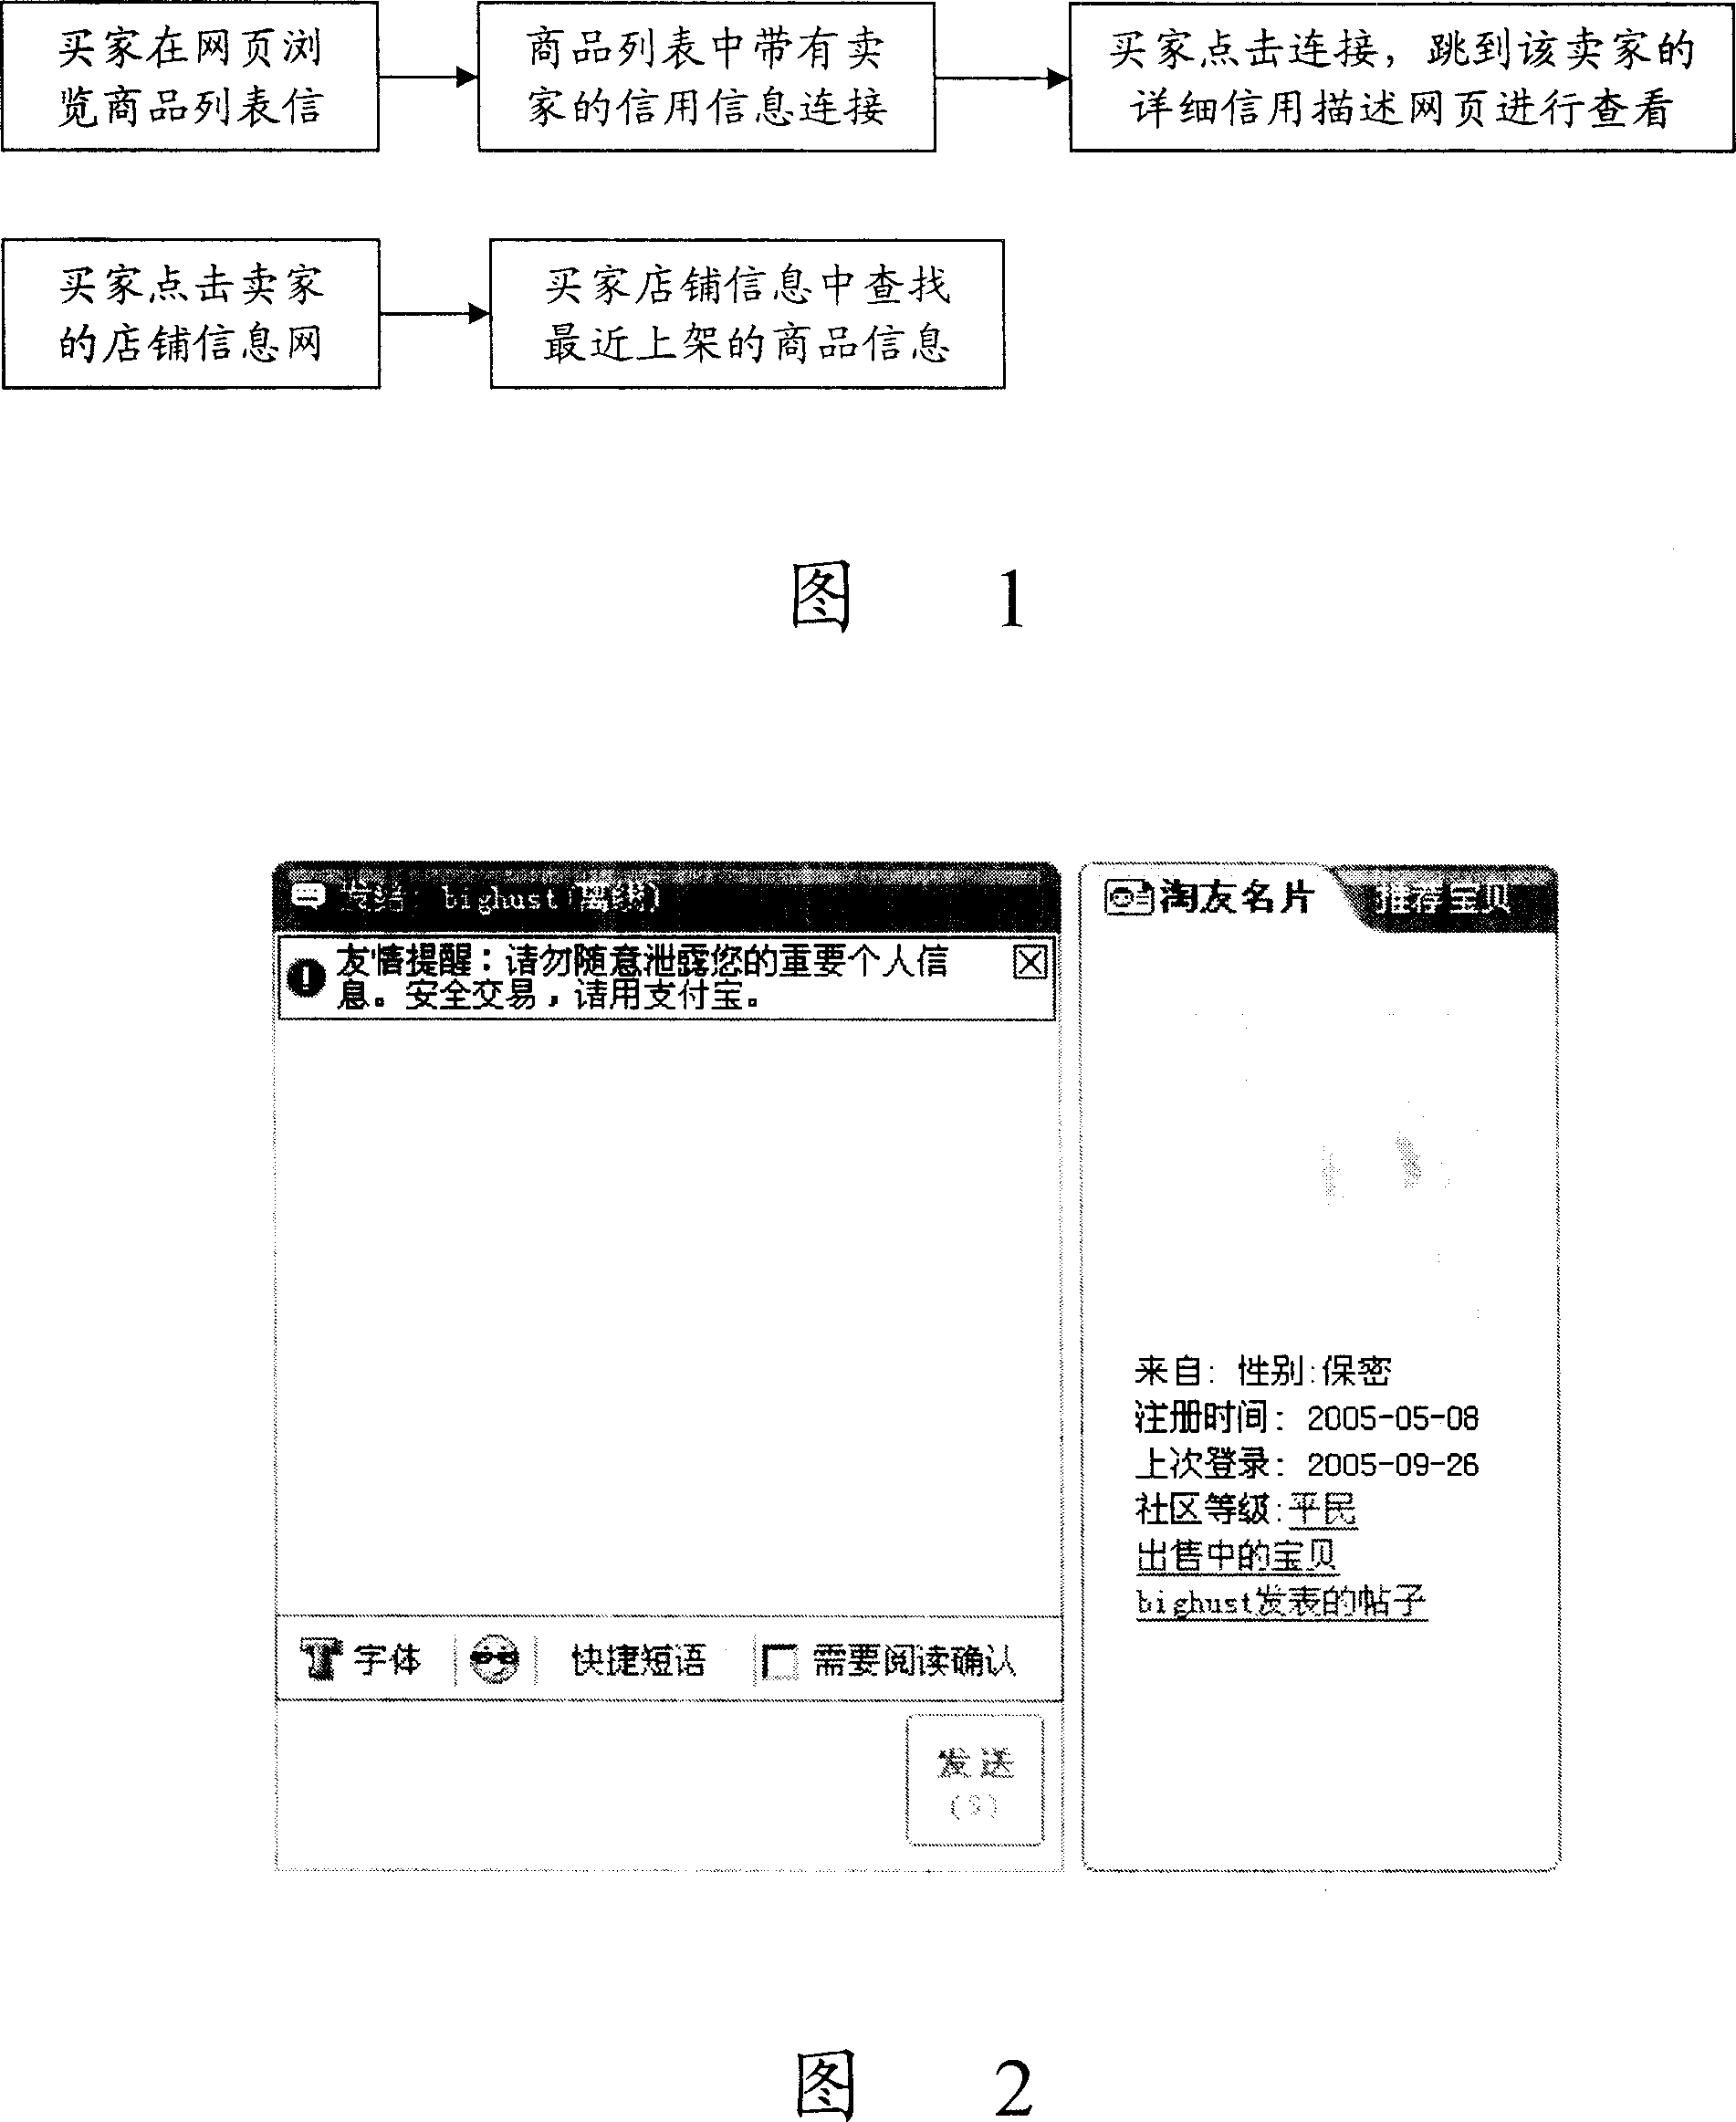 System and method for showing electronic business user's information on immediate communication subscriber end